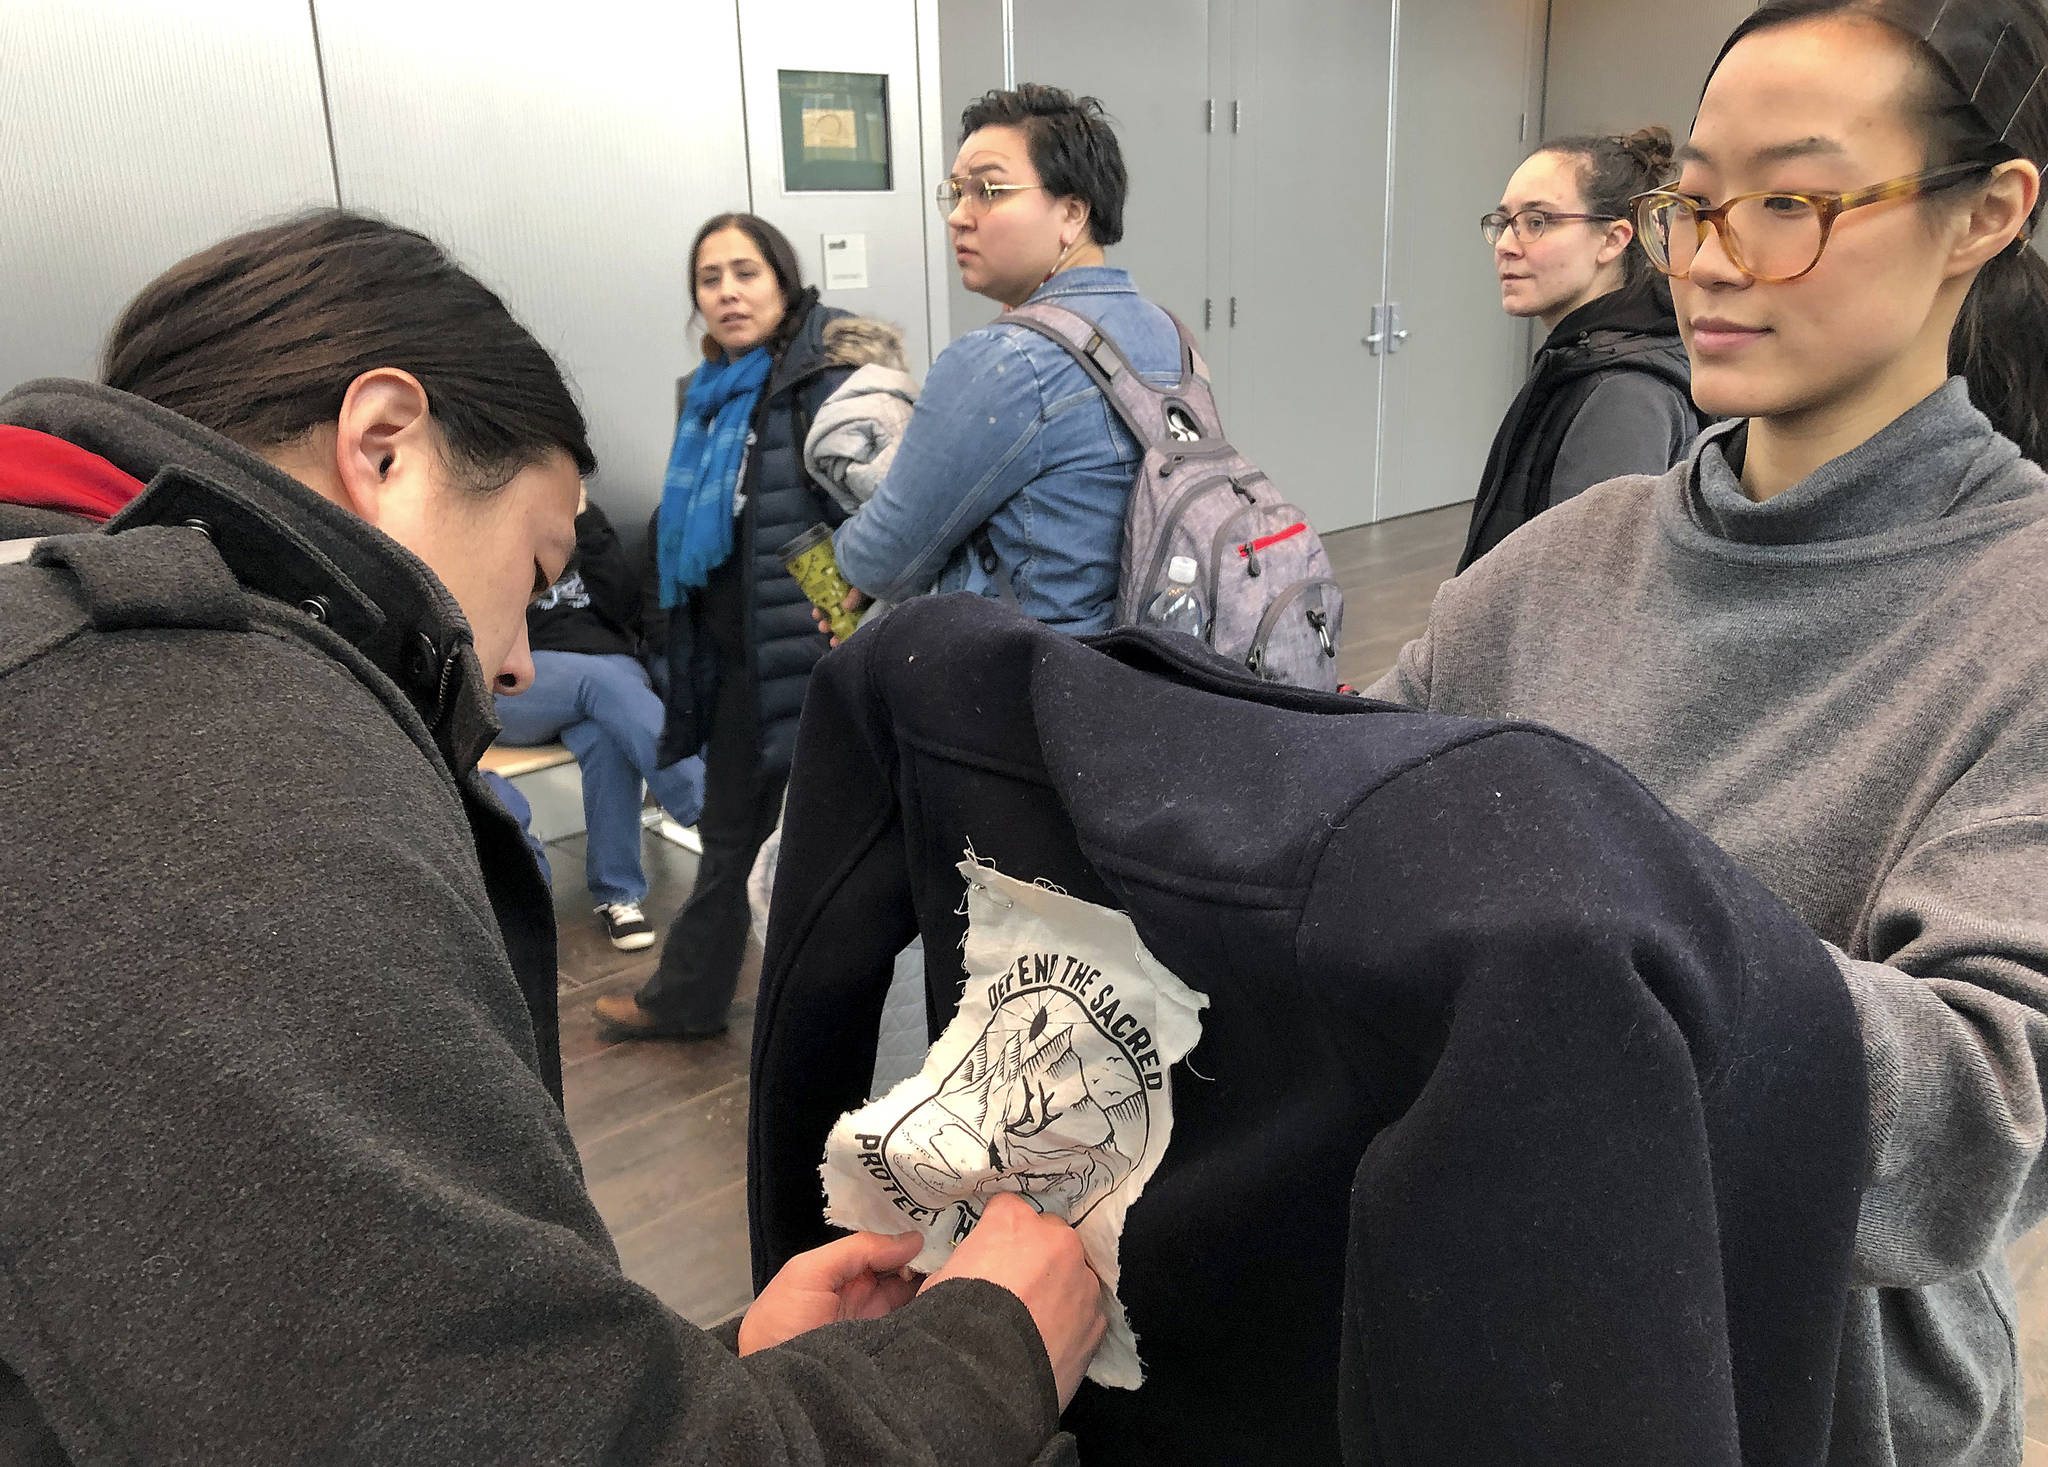 Jeff Chen, left, affixes a “Defend the Sacred” logo to Su Chon’s jacket ahead of a Bureau of Land Management hearing Monday, Feb. 11, 2019, in Anchorage, Alaska. The two Anchorage residents planned to oppose drilling as the federal agency accepted public comments on a draft environmental review on drilling within the coastal plain of the Arctic National Wildlife Refuge. (AP Photo/Mark Thiessen)